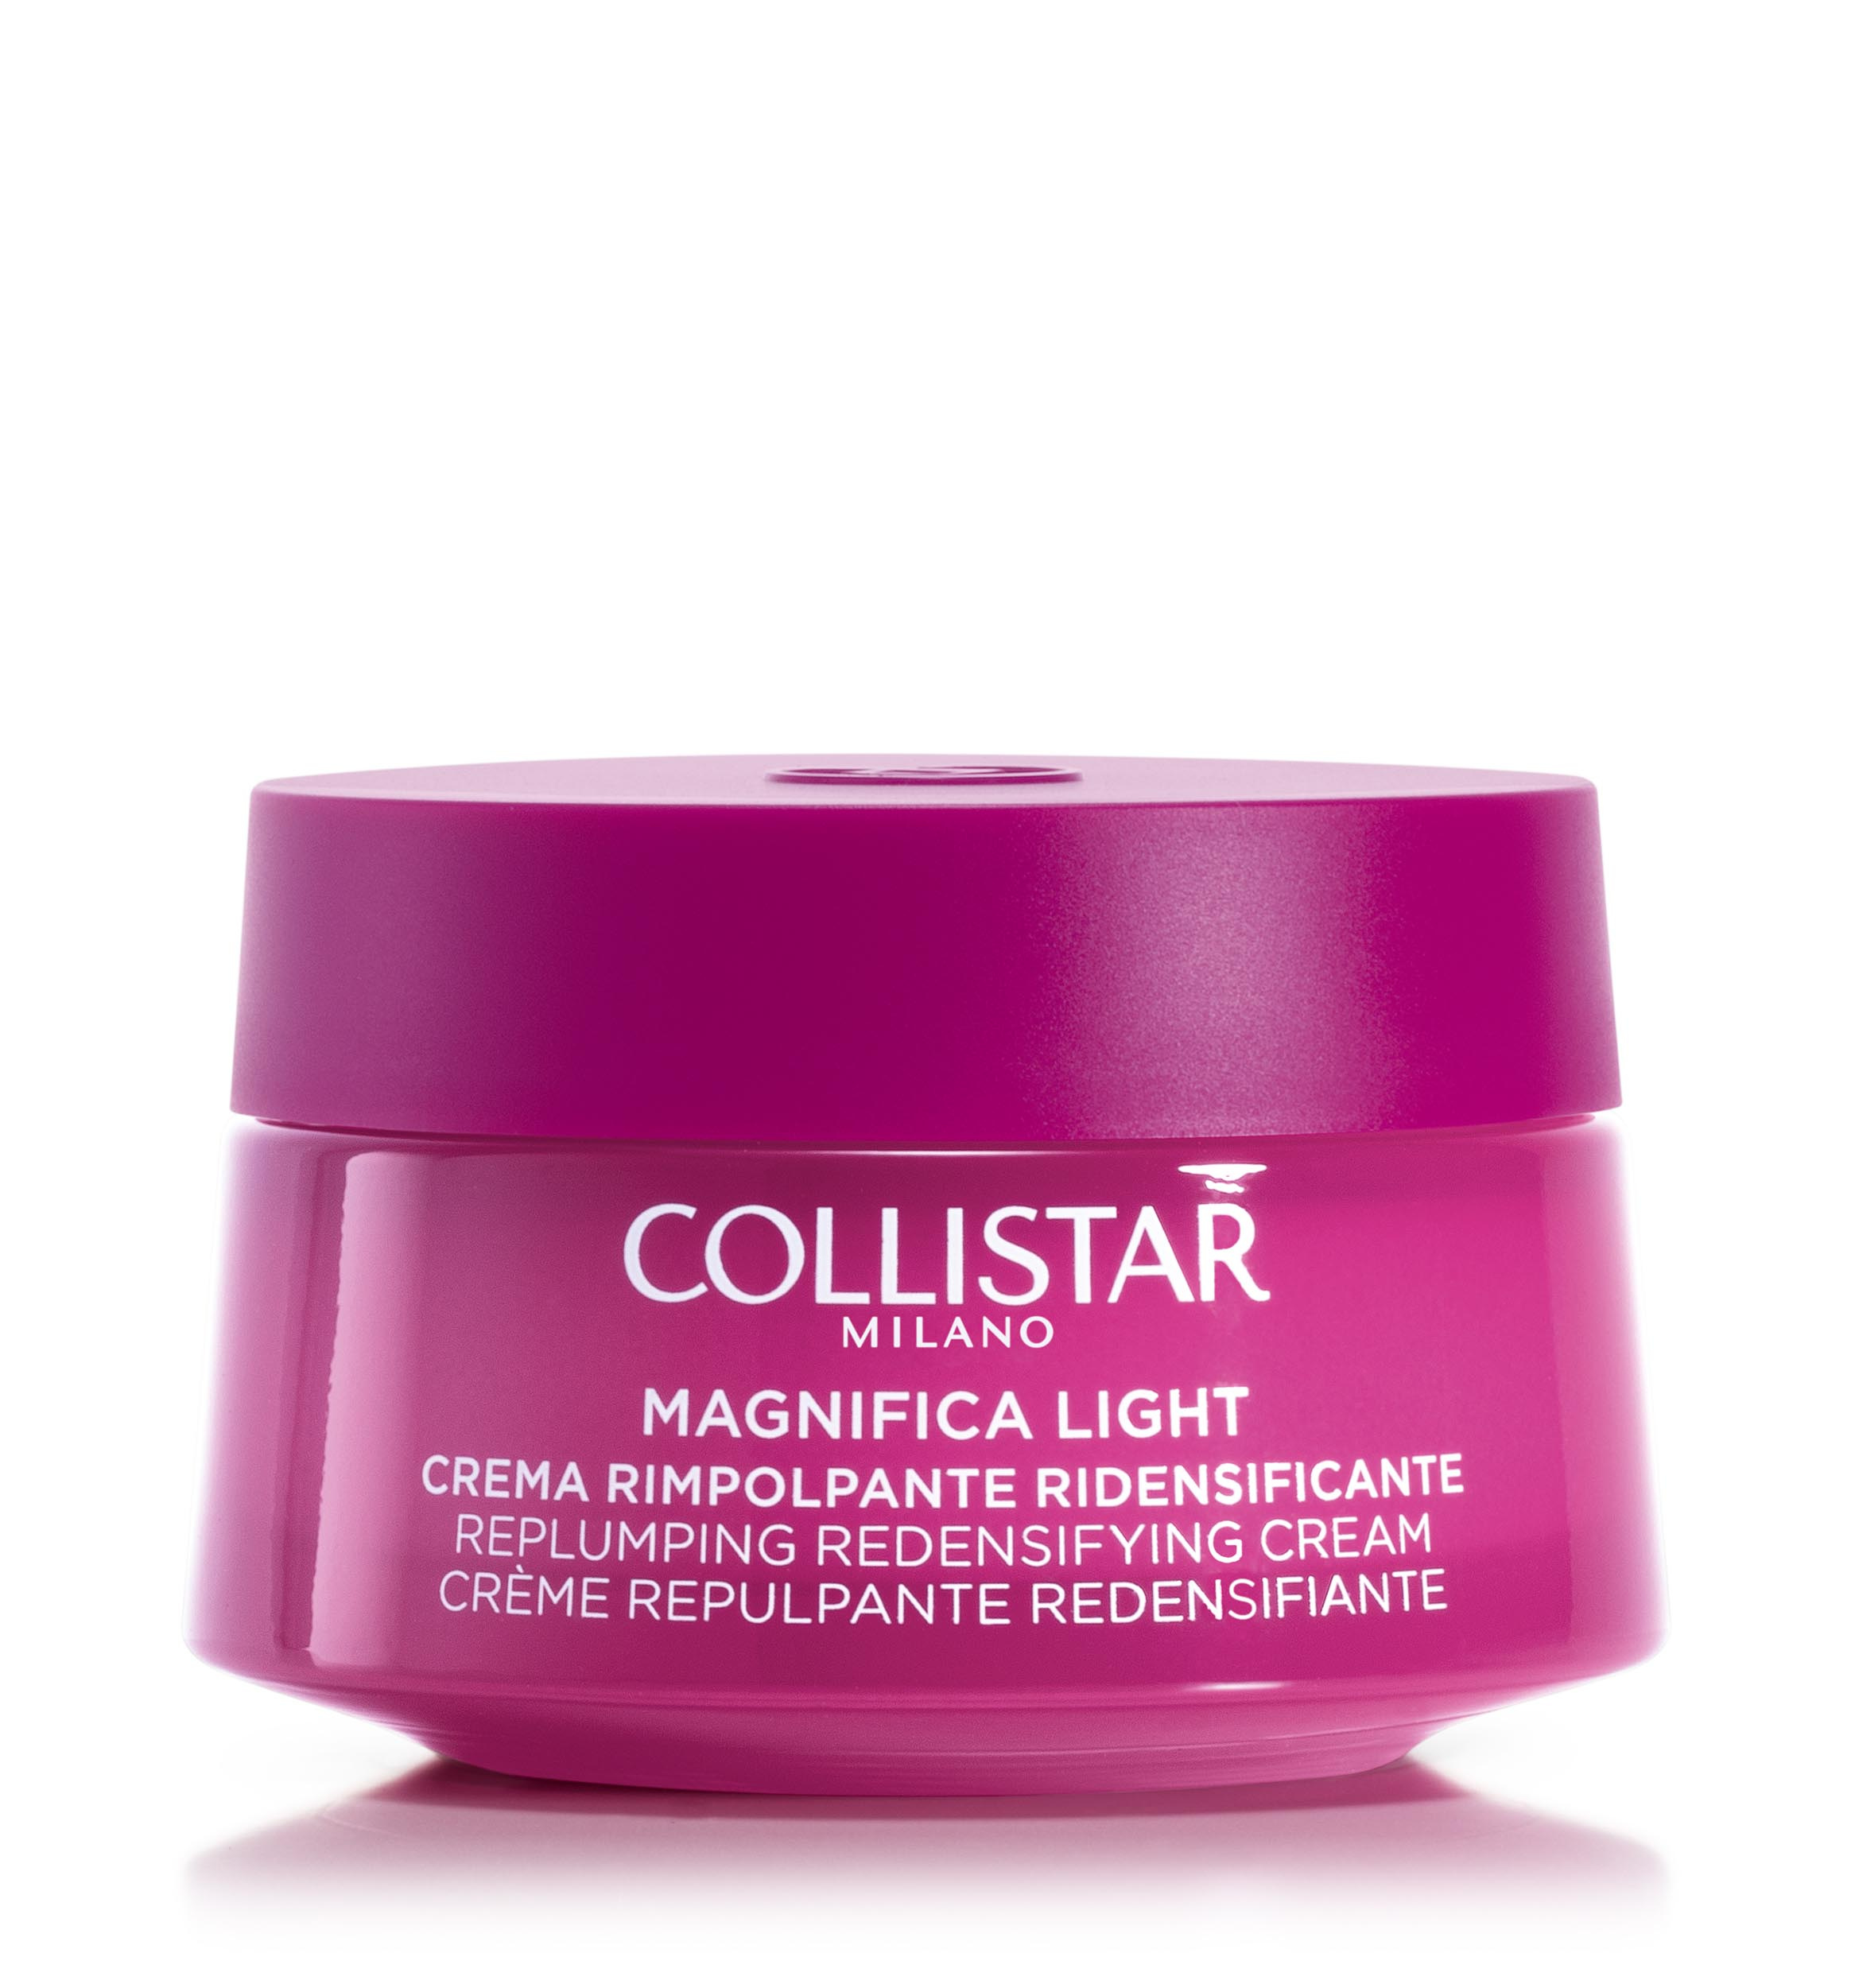 Collistar Light Replumping Redensifying Cream Face And Neck, 50 ml